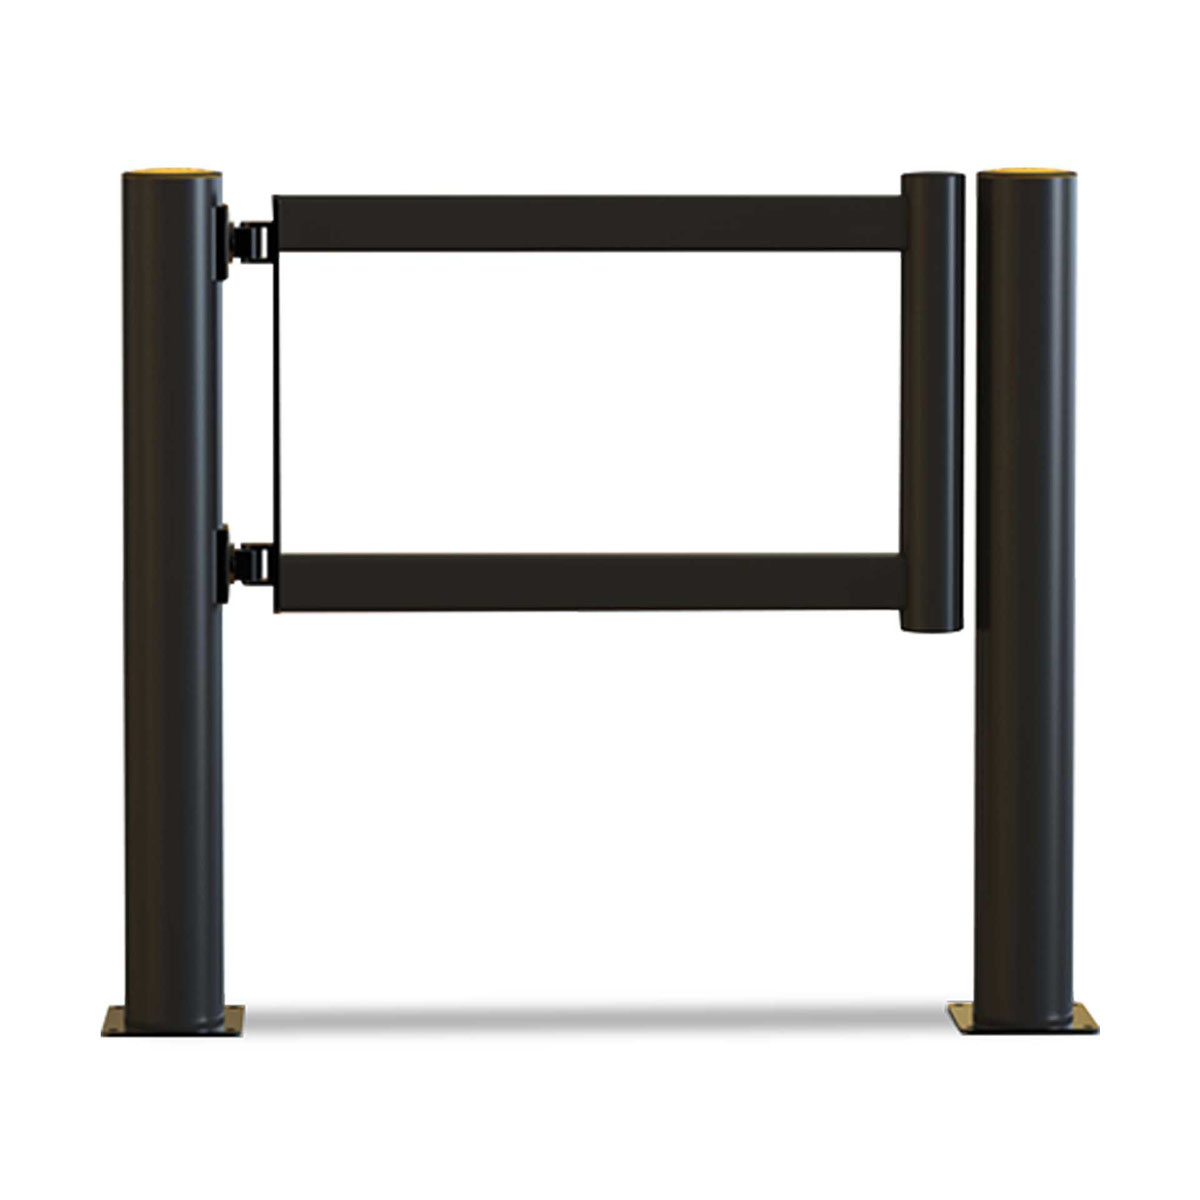 Buy Swing Gate - A-Safe (Flexible Plastic) available at Astrolift NZ